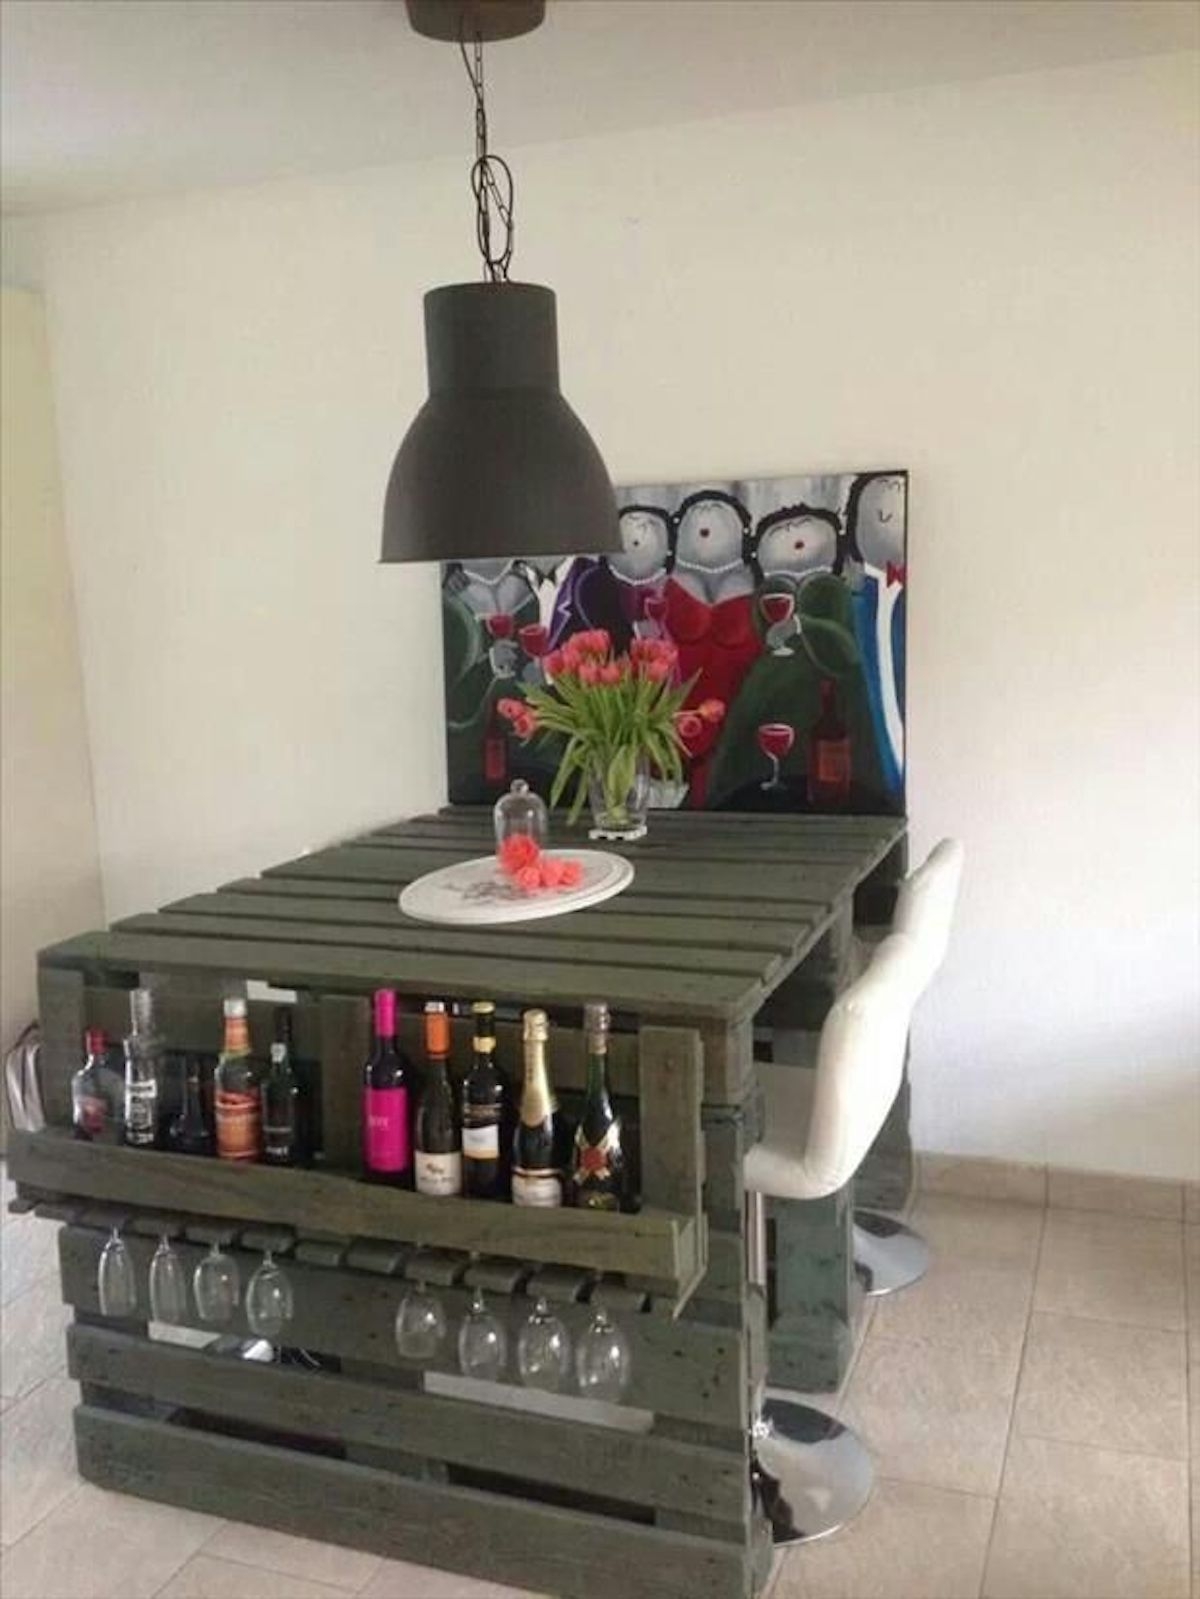 24 amazing uses for old pallets even if i was